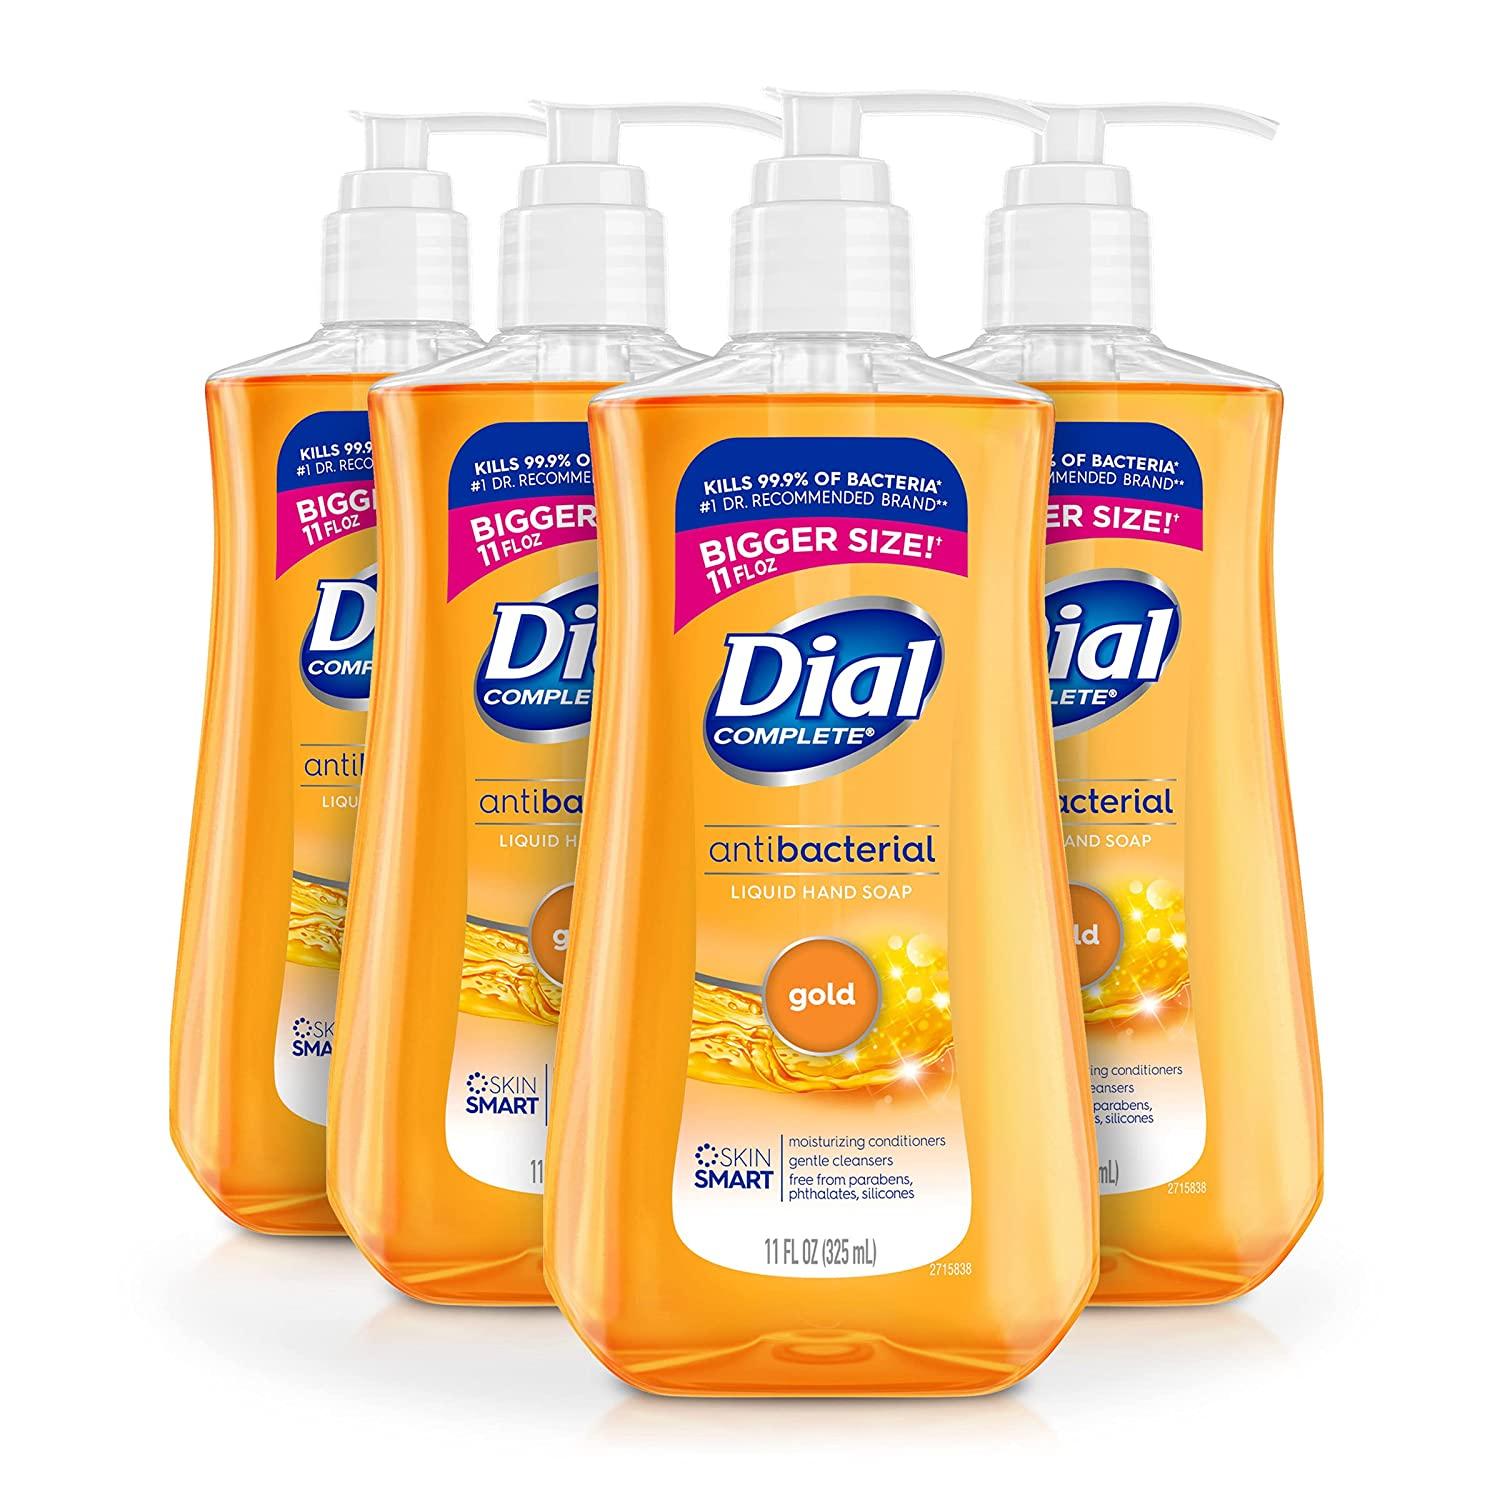 4 Dial Antibacterial Liquid Hand Soap for $5.53 Shipped